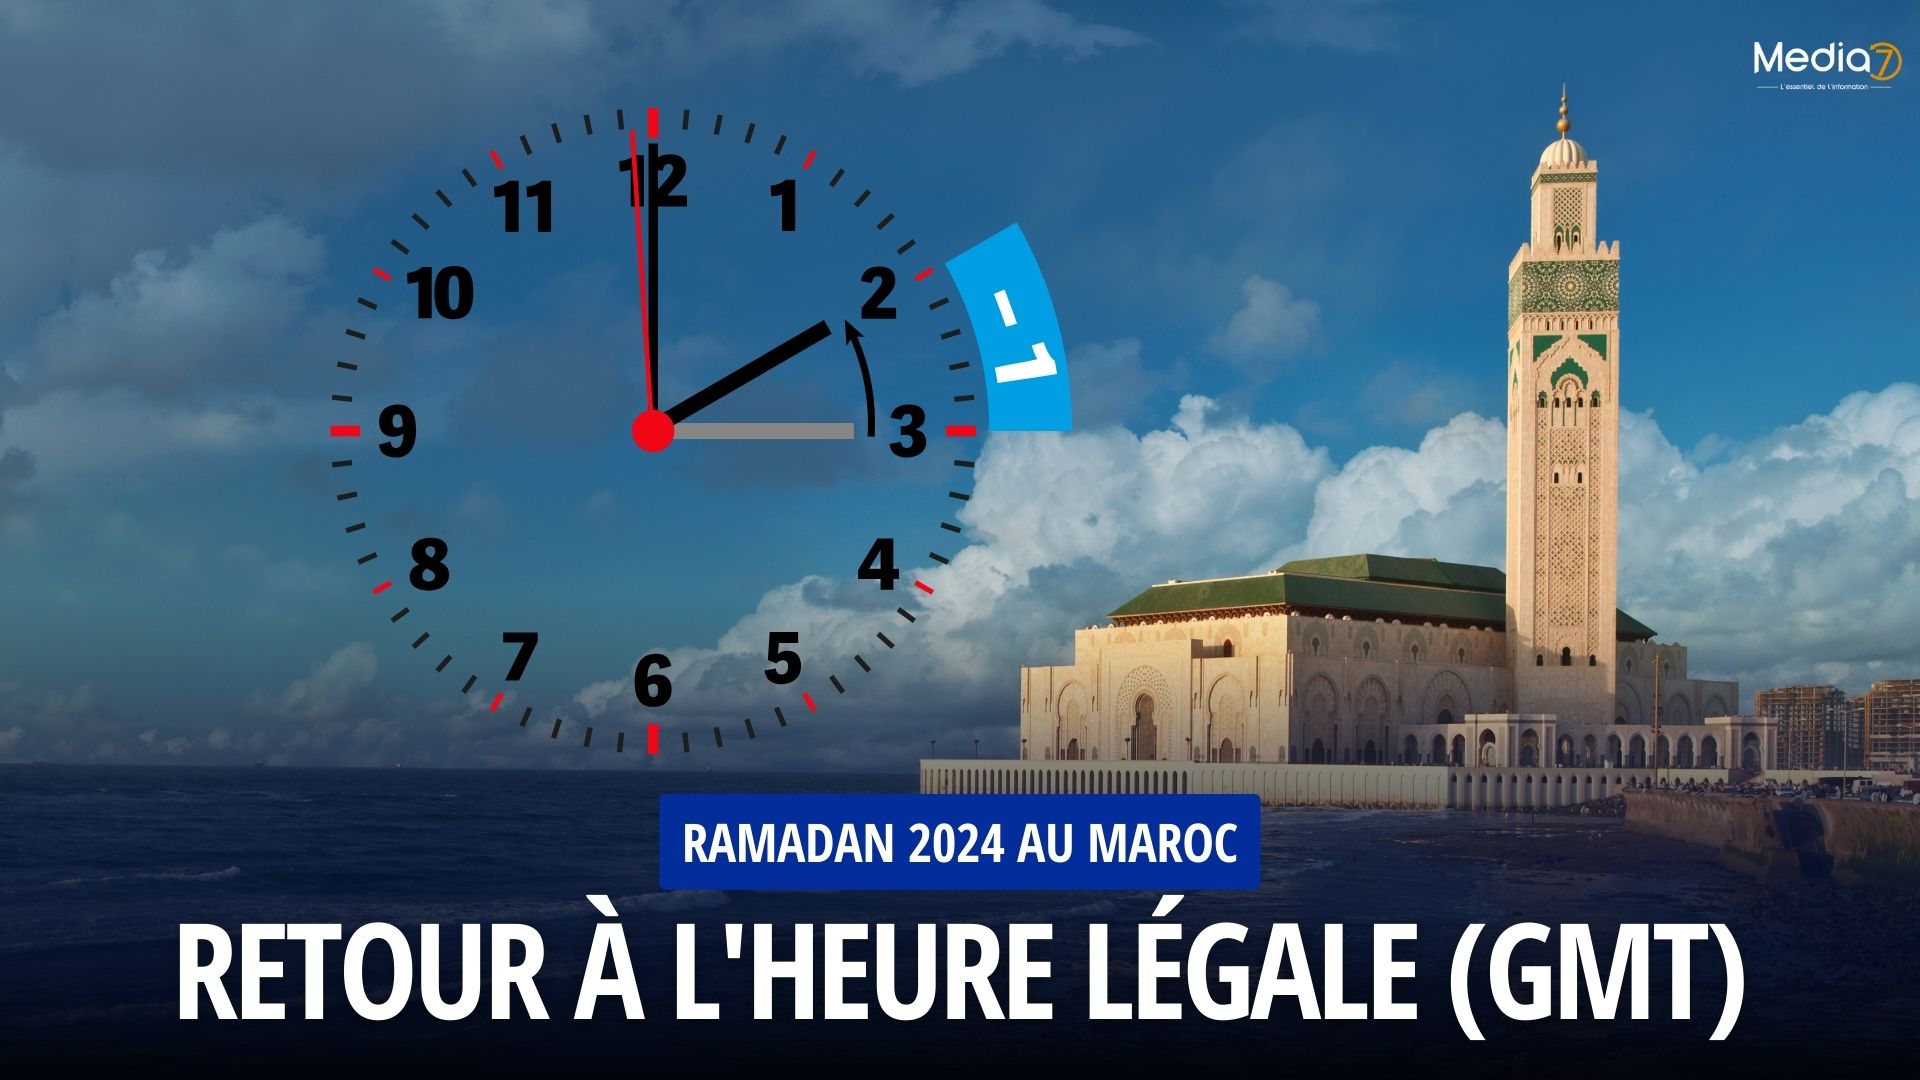 Return to legal time (GMT) for Ramadan 2024 in Morocco